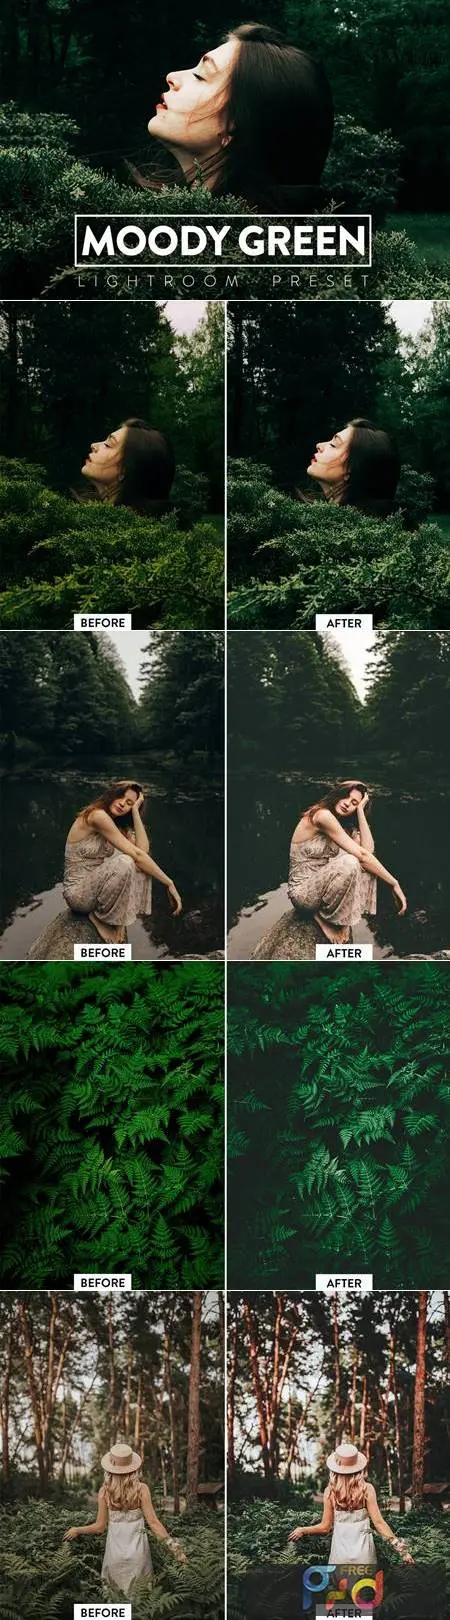 10 Moody Green Lightroom Presets 6YW9RS8 1